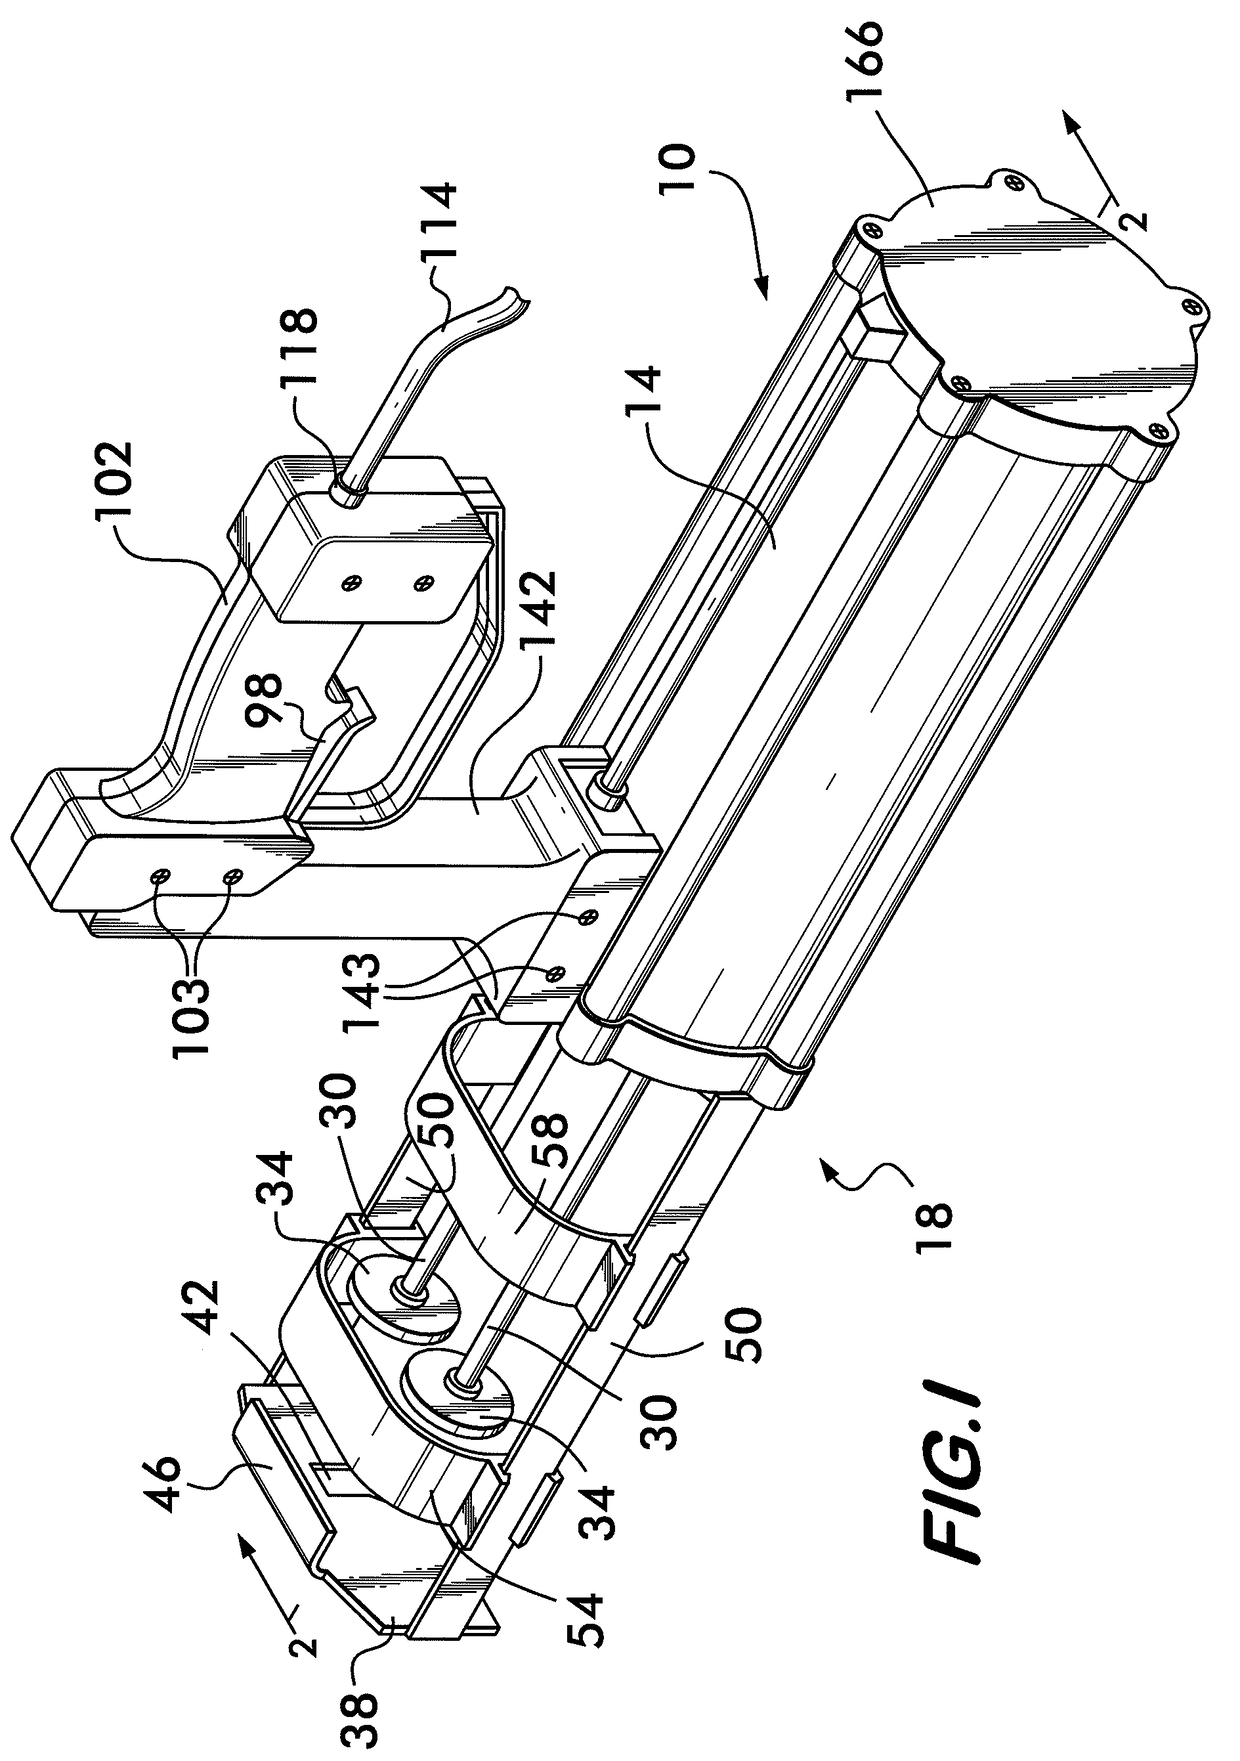 Dispensing device arranged to reduce the risk of strain and injury during use